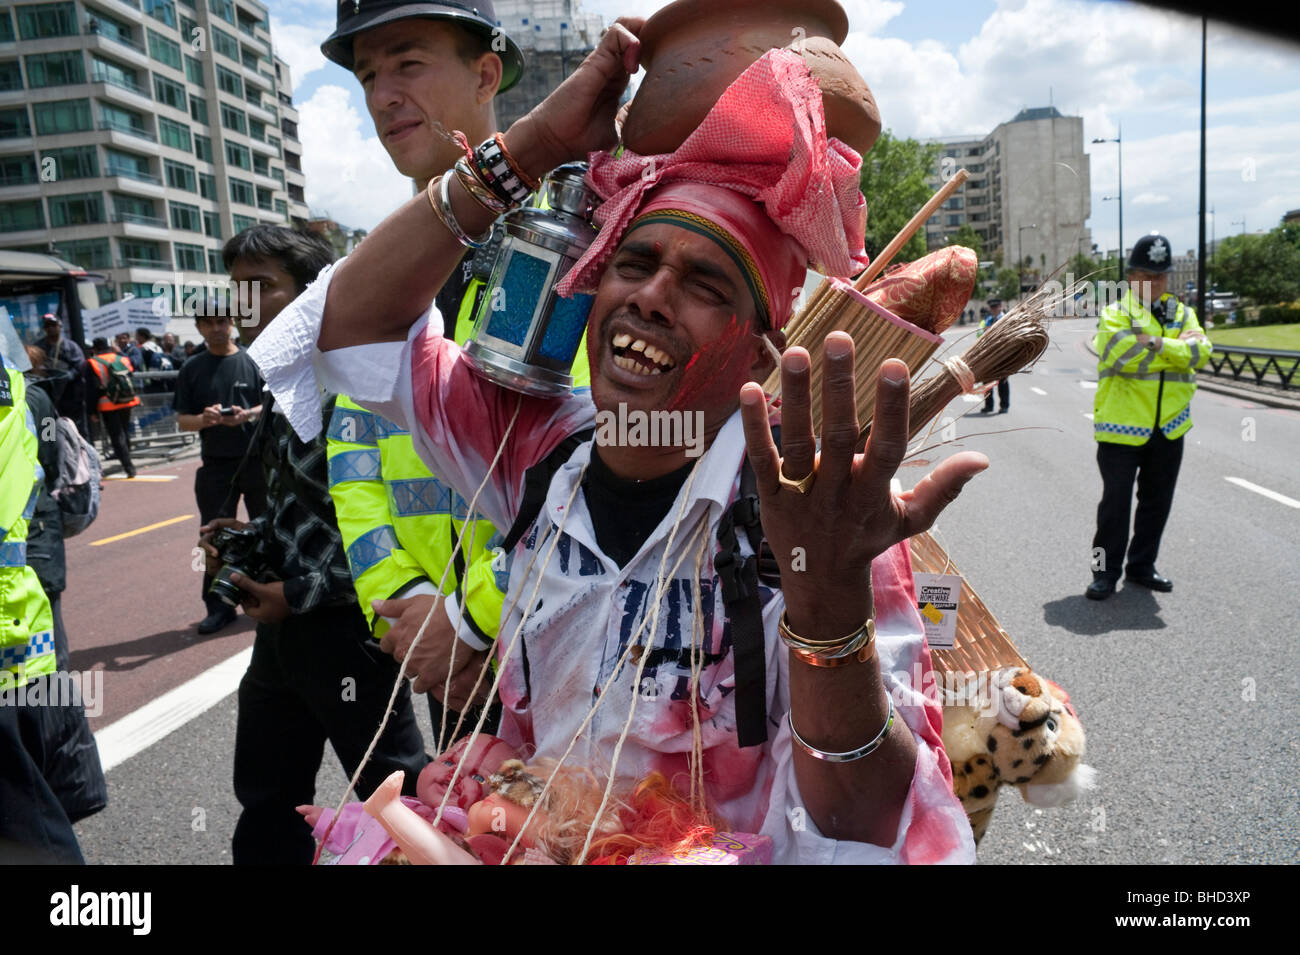 'March for Imprisoned Tamils' London 20 June 2009. Man with jug on head and police Stock Photo